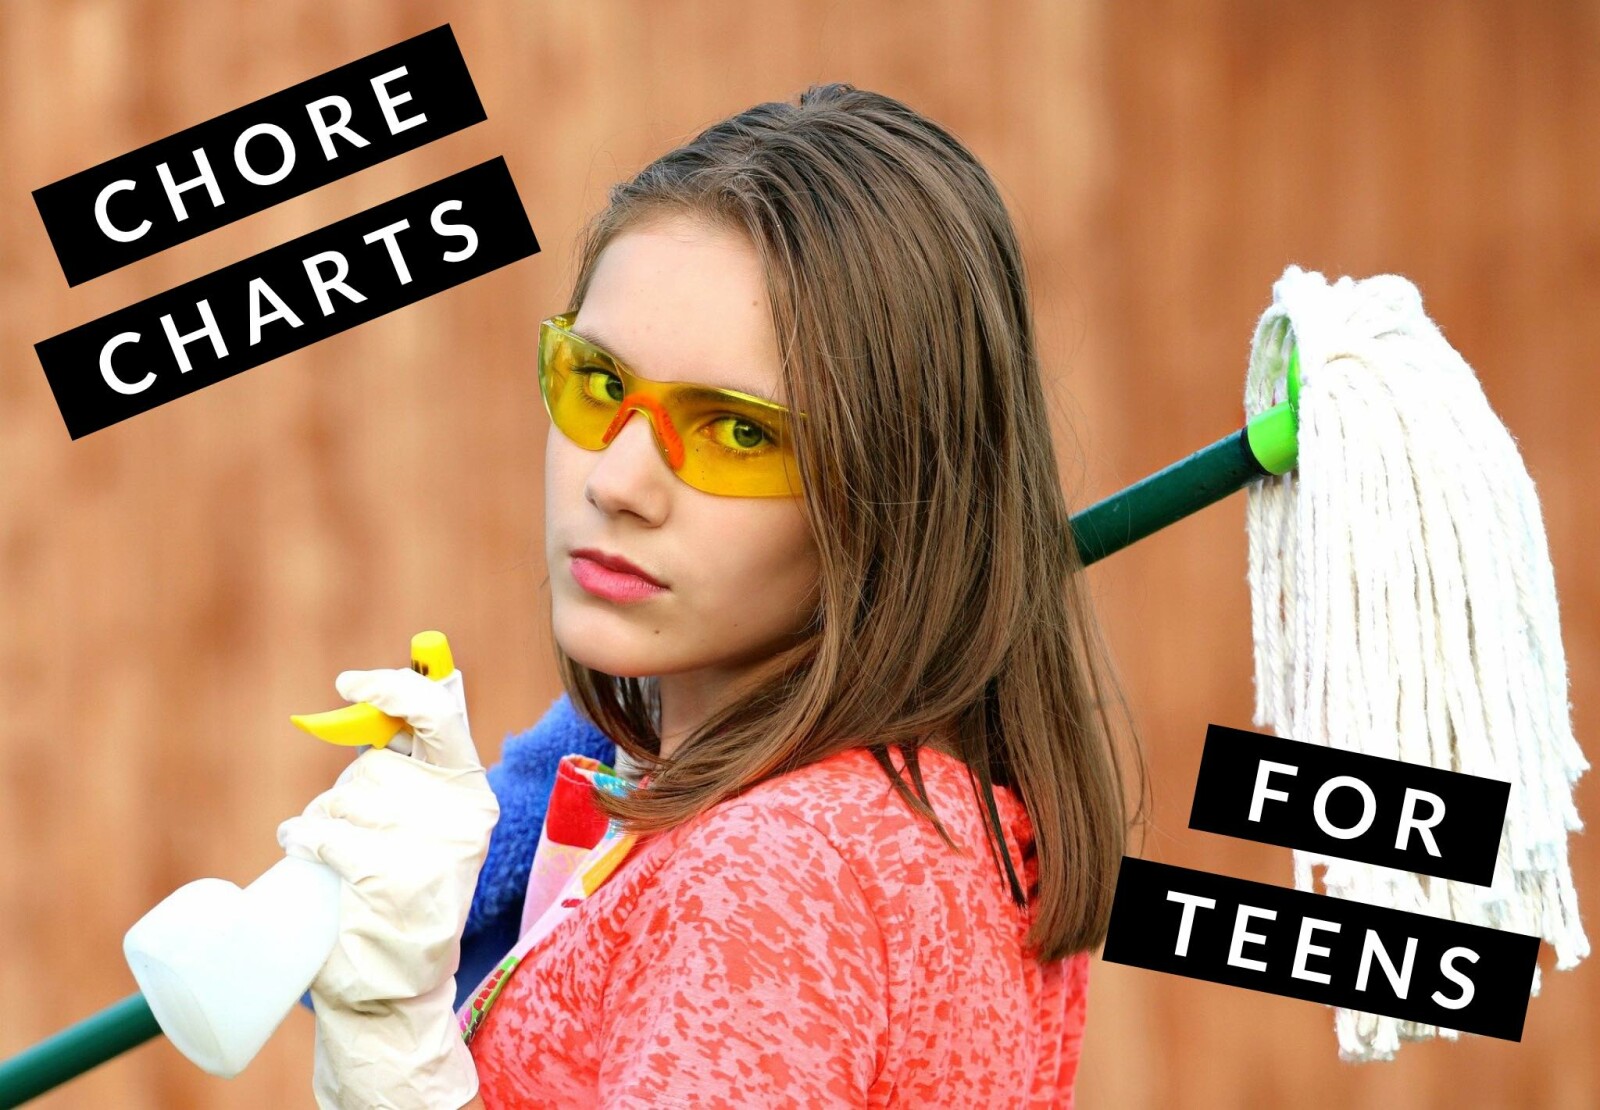 Chore Charts For Teens